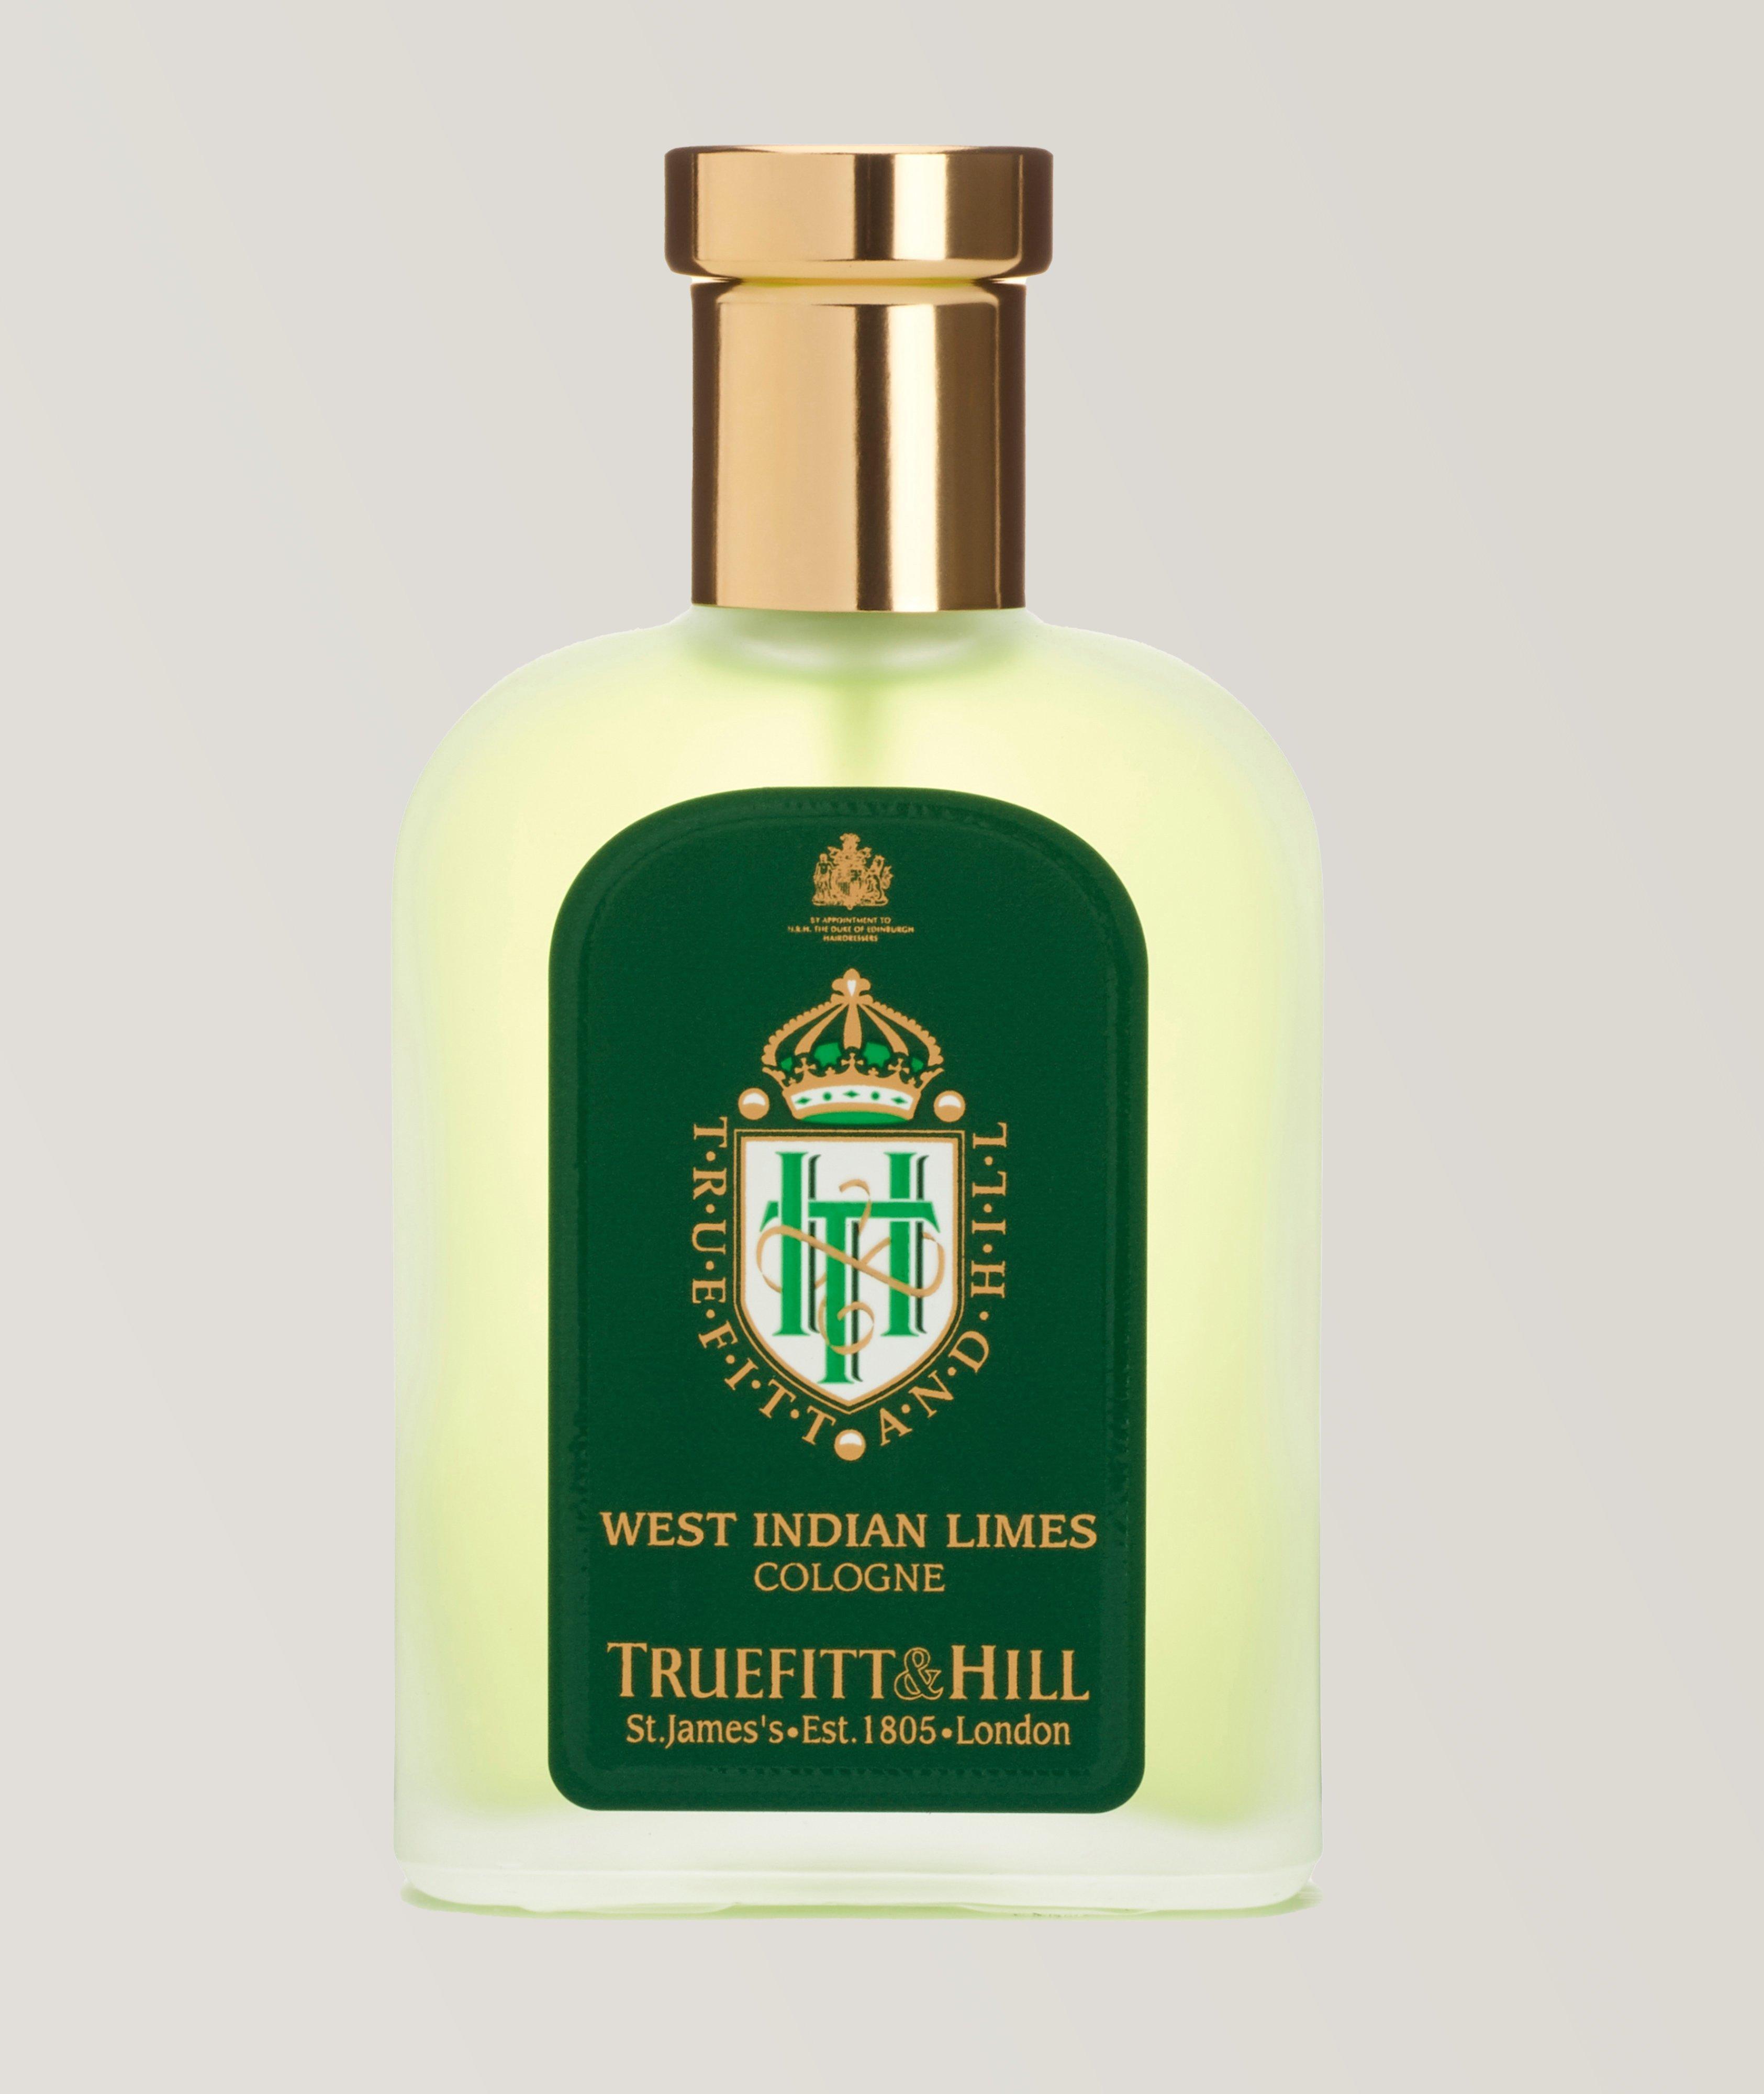 West Indian Limes Cologne 100ml image 0